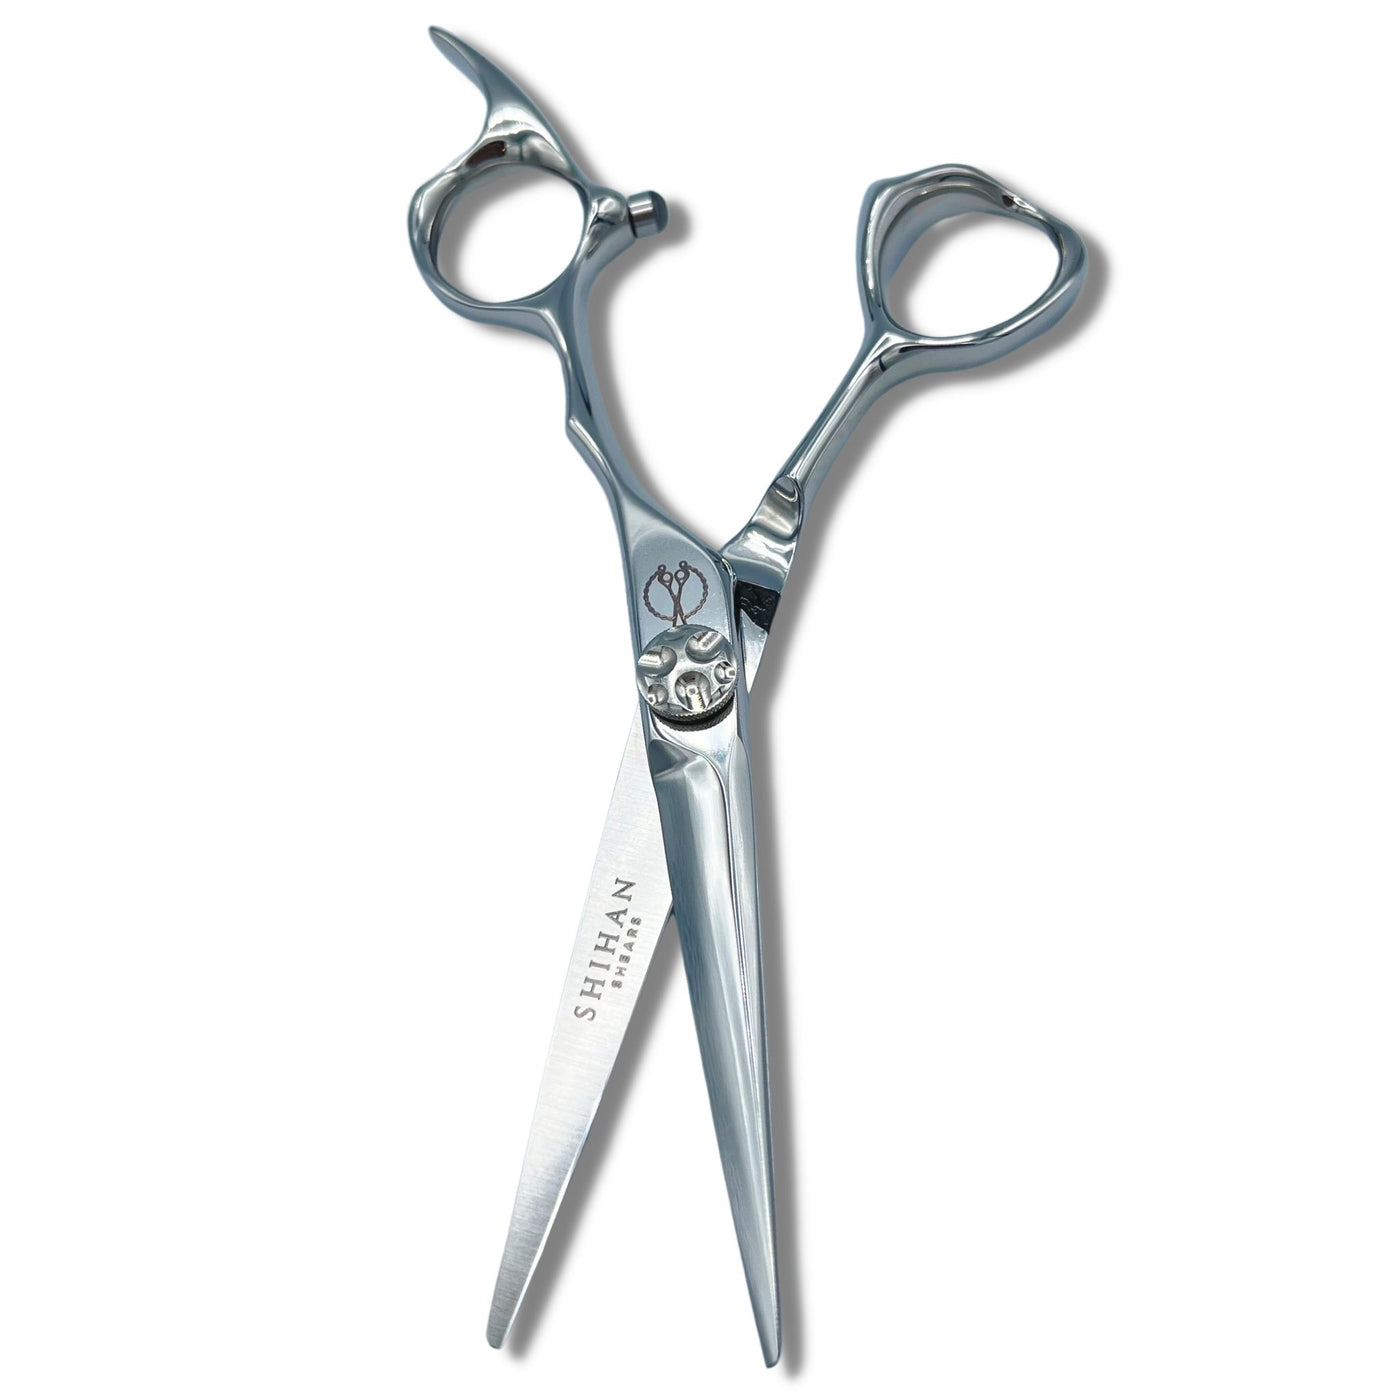 What scissors to use for different haircuts - Scissor Tech USA